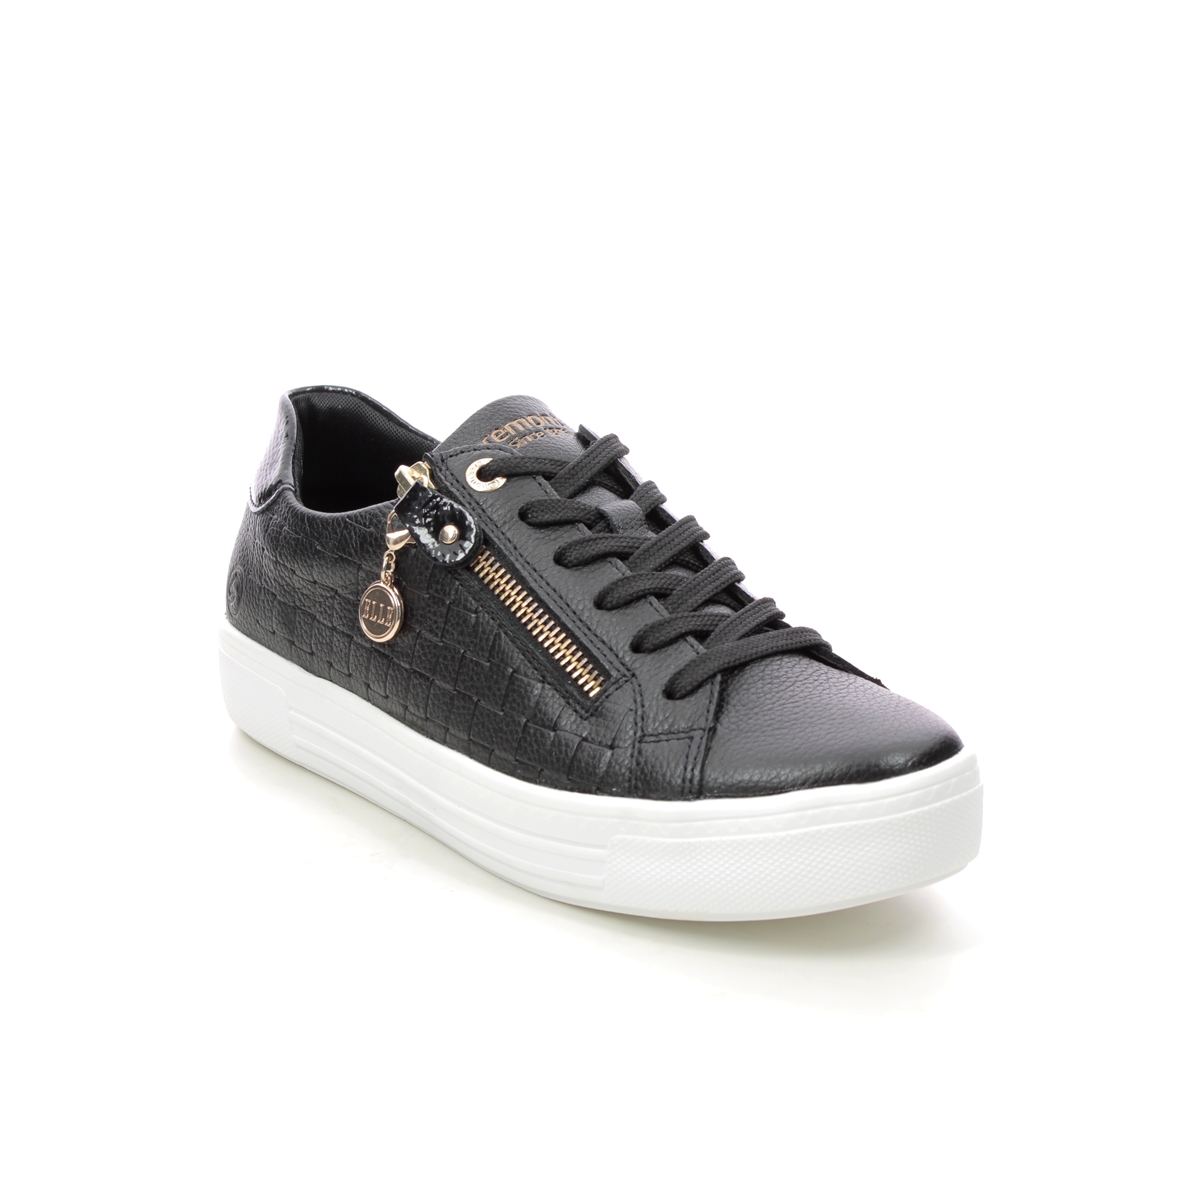 Remonte Altozip Elle Black Leather Womens Trainers D0916-00 In Size 37 In Plain Black Leather